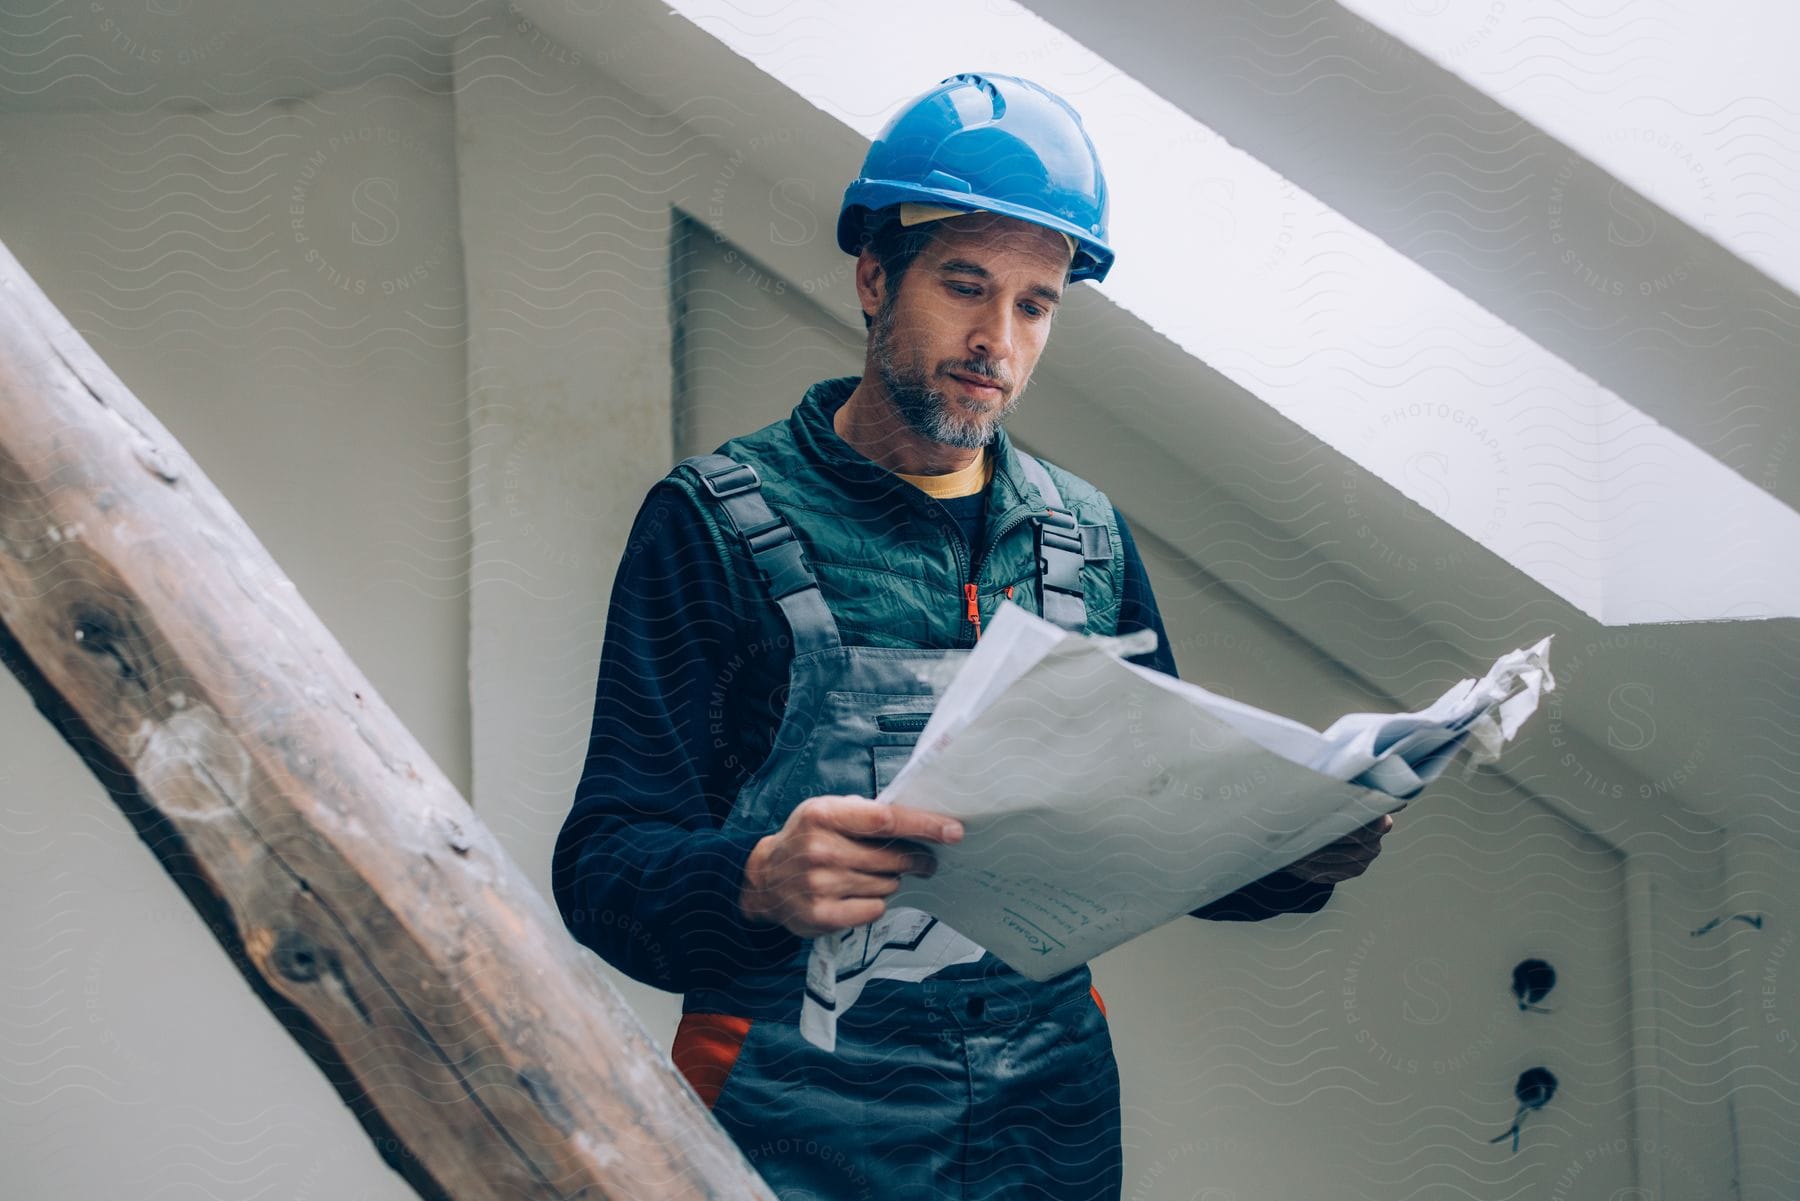 Man in overalls analyzing a project with a protective helmet.